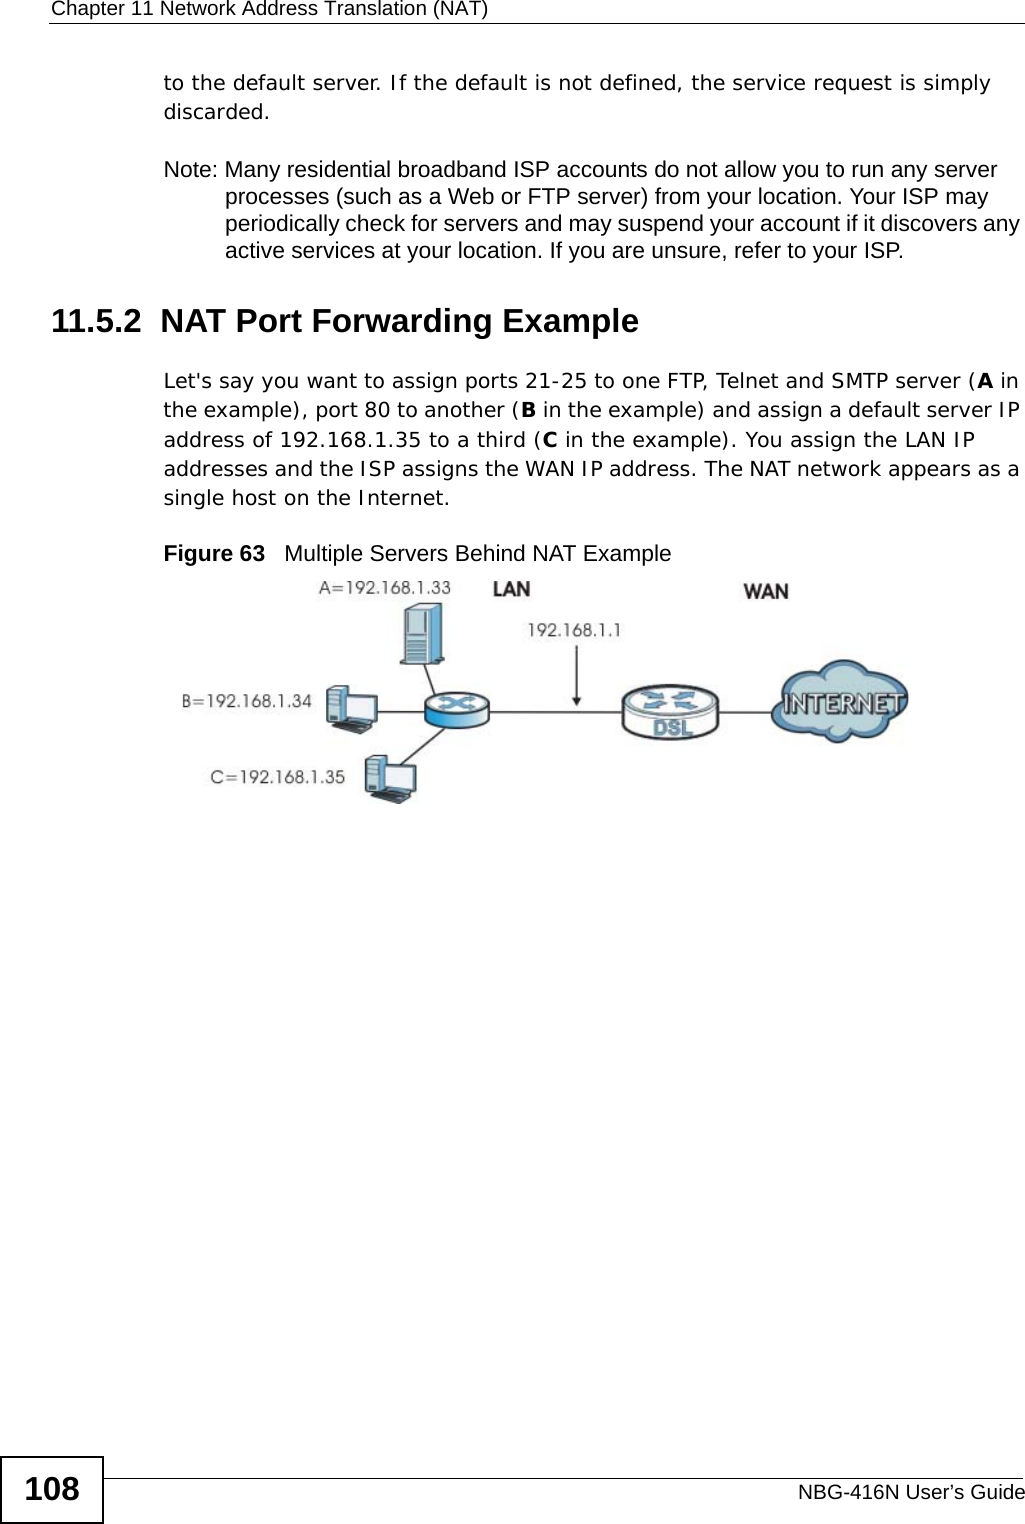 Chapter 11 Network Address Translation (NAT)NBG-416N User’s Guide108to the default server. If the default is not defined, the service request is simply discarded.Note: Many residential broadband ISP accounts do not allow you to run any server processes (such as a Web or FTP server) from your location. Your ISP may periodically check for servers and may suspend your account if it discovers any active services at your location. If you are unsure, refer to your ISP.11.5.2  NAT Port Forwarding ExampleLet&apos;s say you want to assign ports 21-25 to one FTP, Telnet and SMTP server (A in the example), port 80 to another (B in the example) and assign a default server IP address of 192.168.1.35 to a third (C in the example). You assign the LAN IP addresses and the ISP assigns the WAN IP address. The NAT network appears as a single host on the Internet.Figure 63   Multiple Servers Behind NAT Example